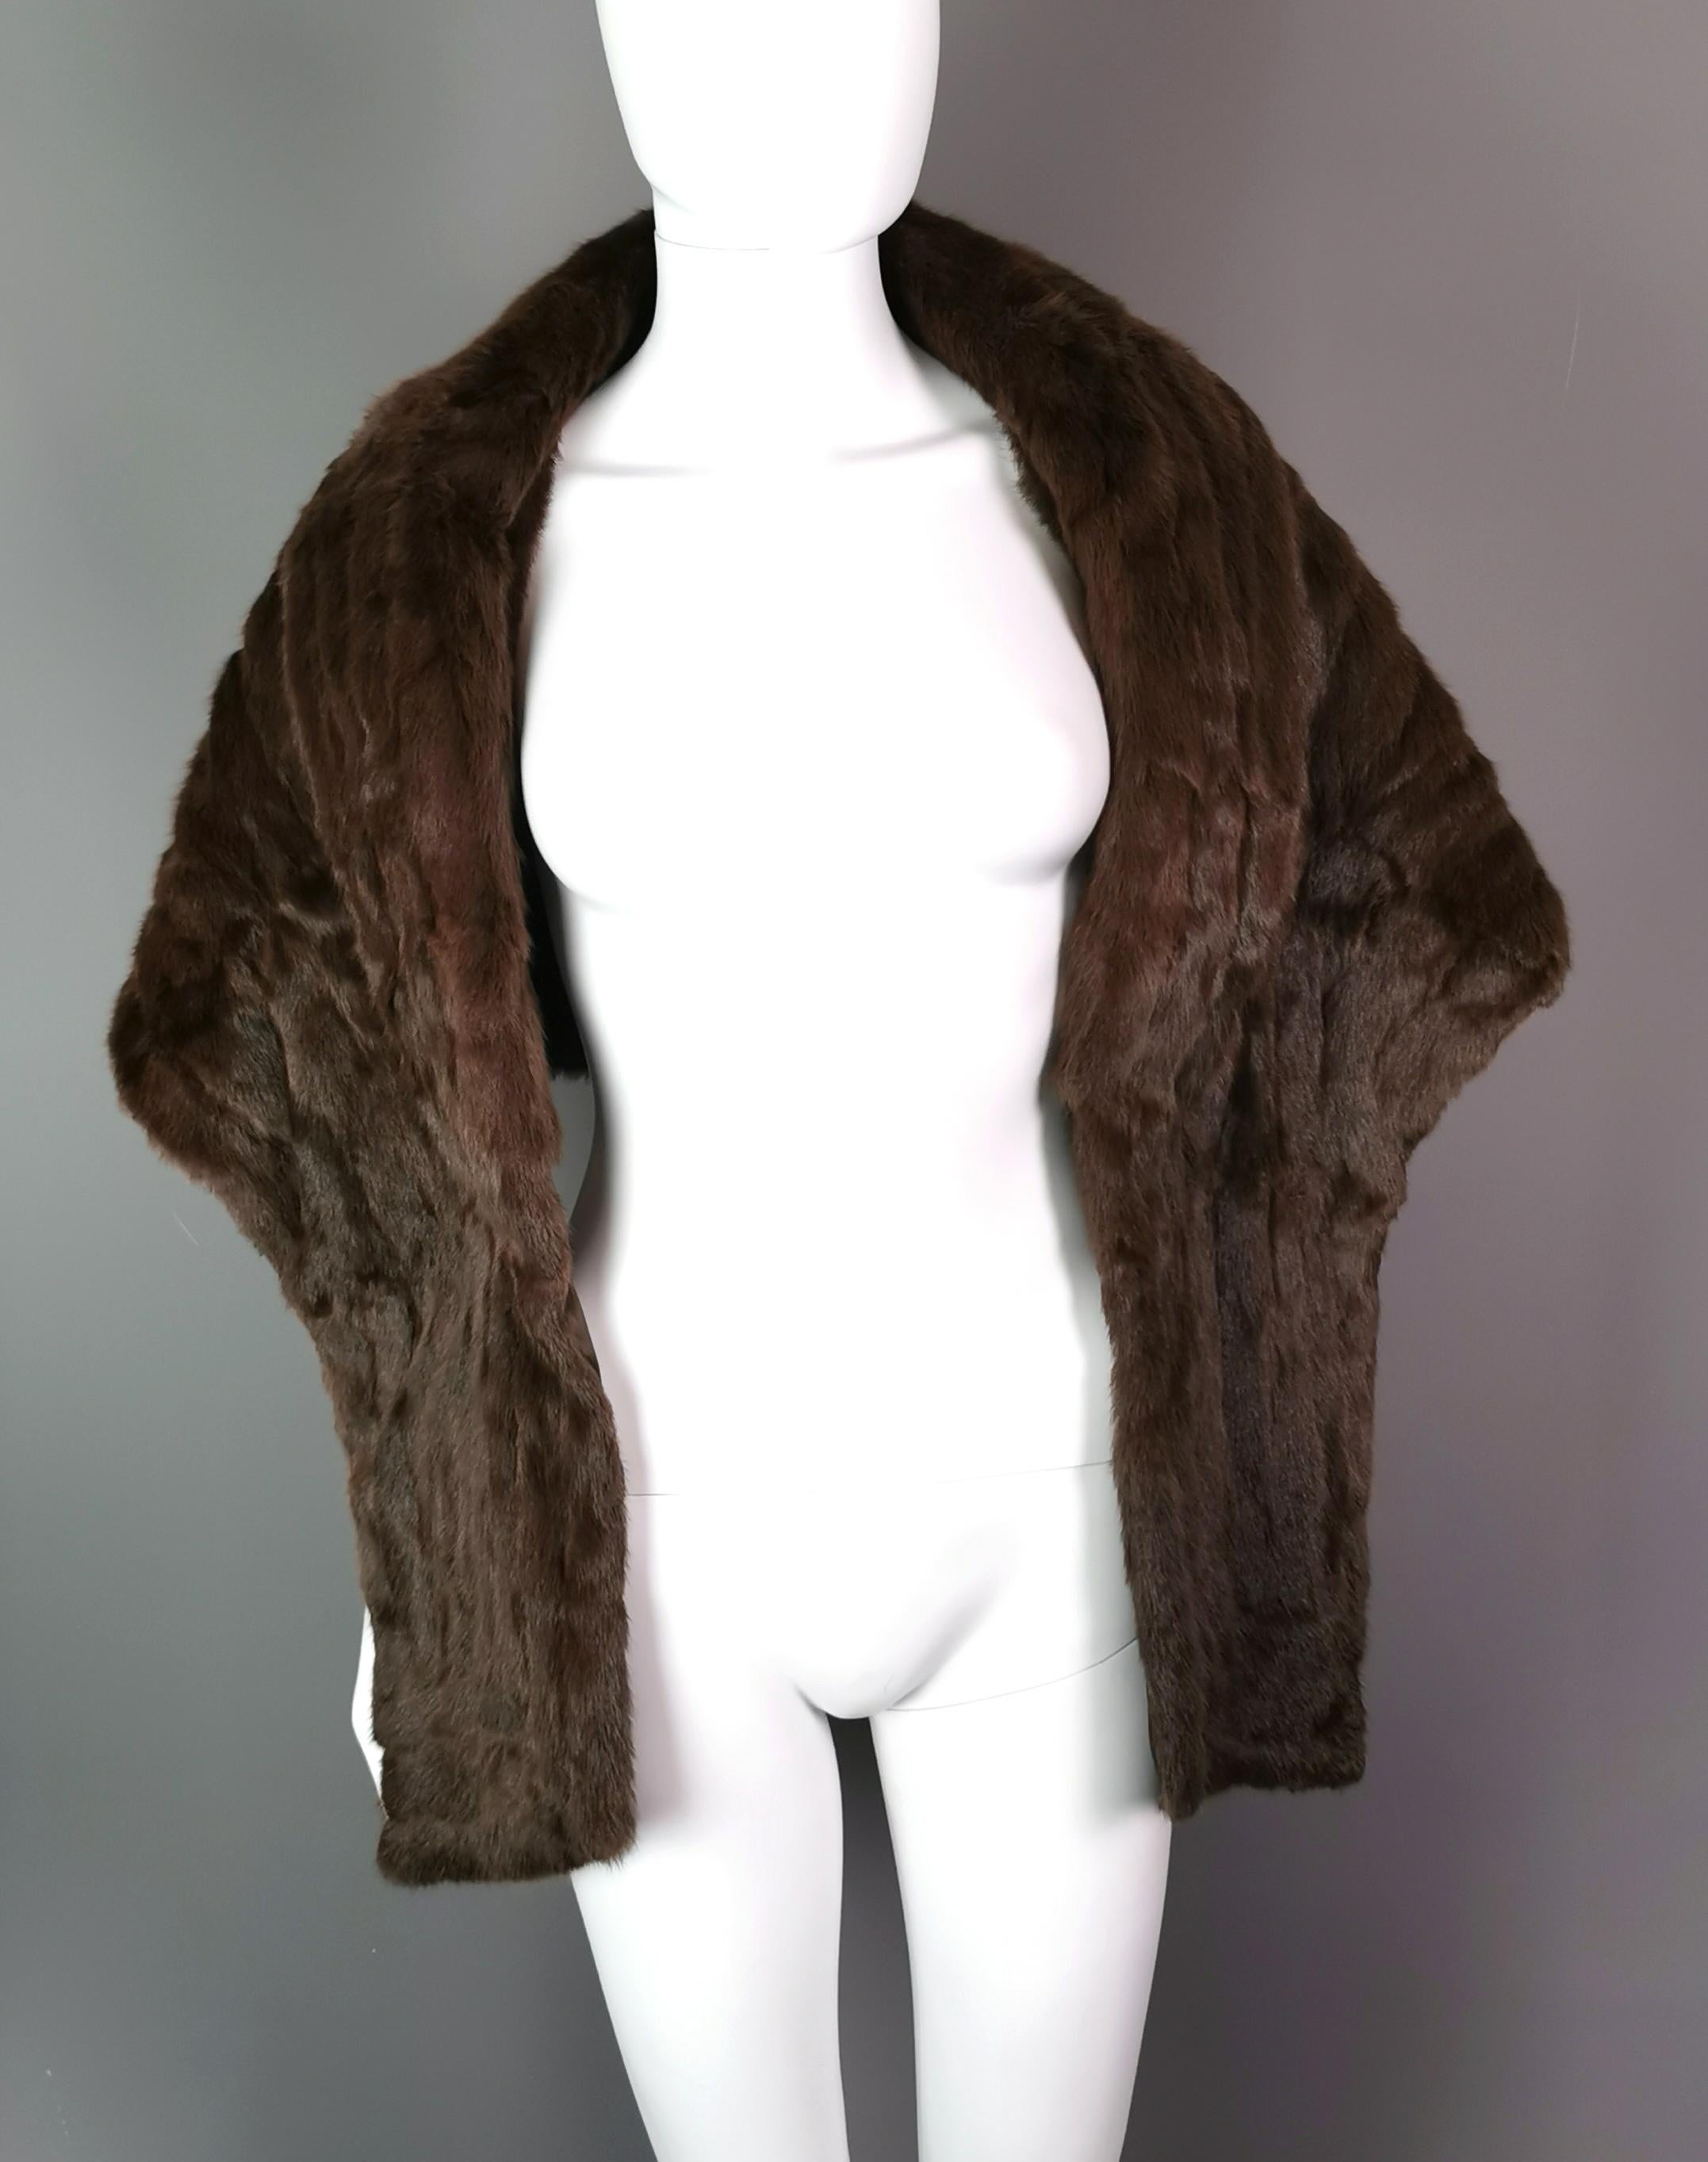 A beautiful vintage luxurious c1950s soft real mink fur stole.

It is a large and very high quality stole, made with super soft mink fur in mahogany brown.

The stole is lined in a rich chocolate brown coloured satin, no fasteners.

Labelled Charles